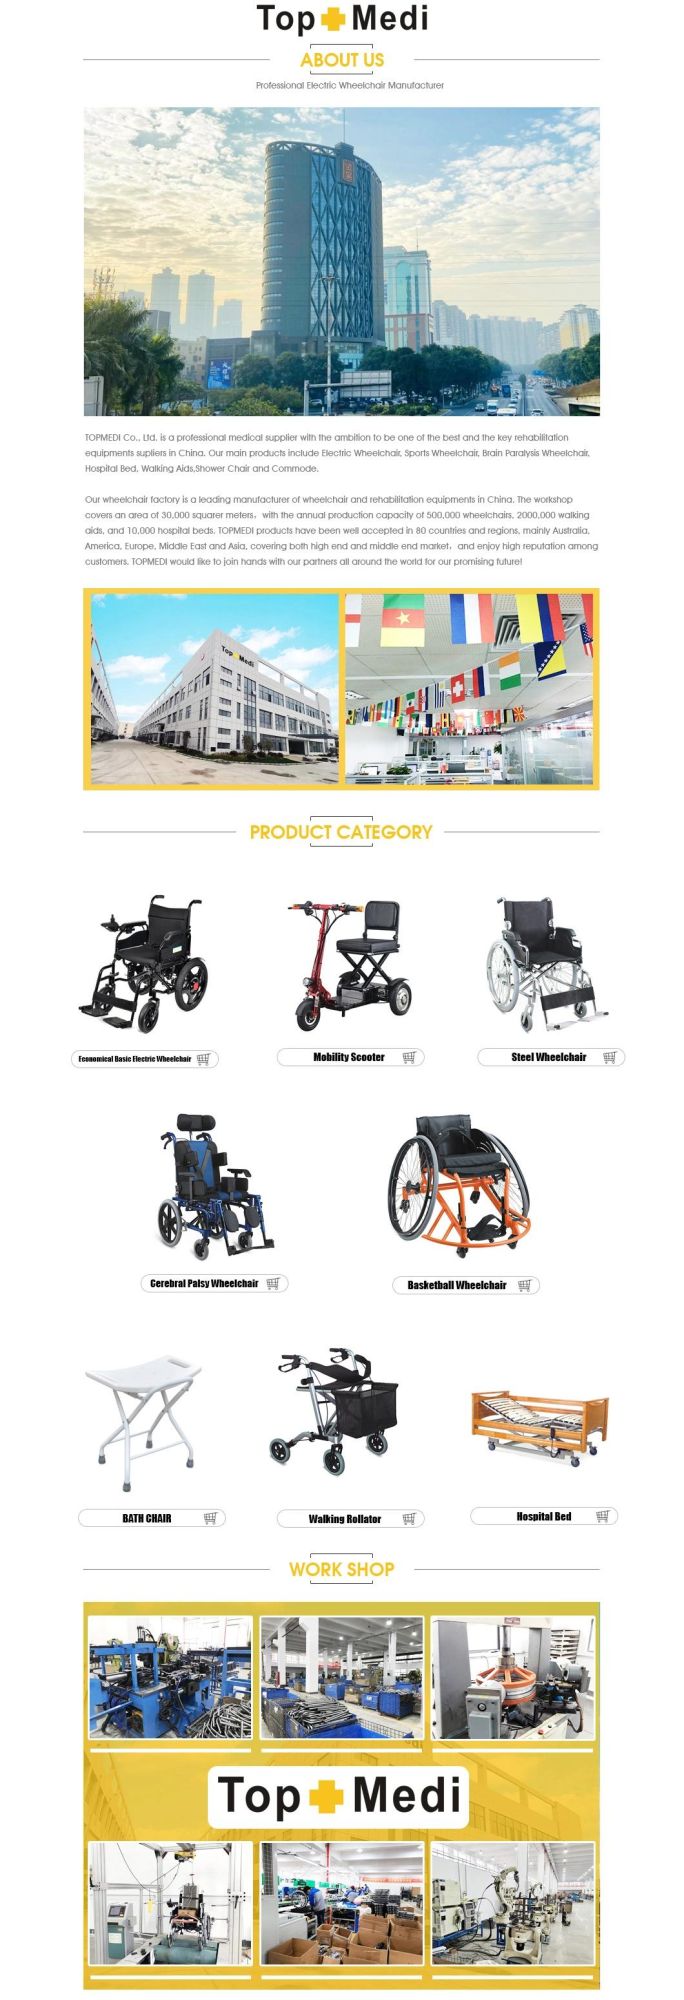 Rehabilitation Therapy Multifunction Patient Transfer Commode Wheelchair